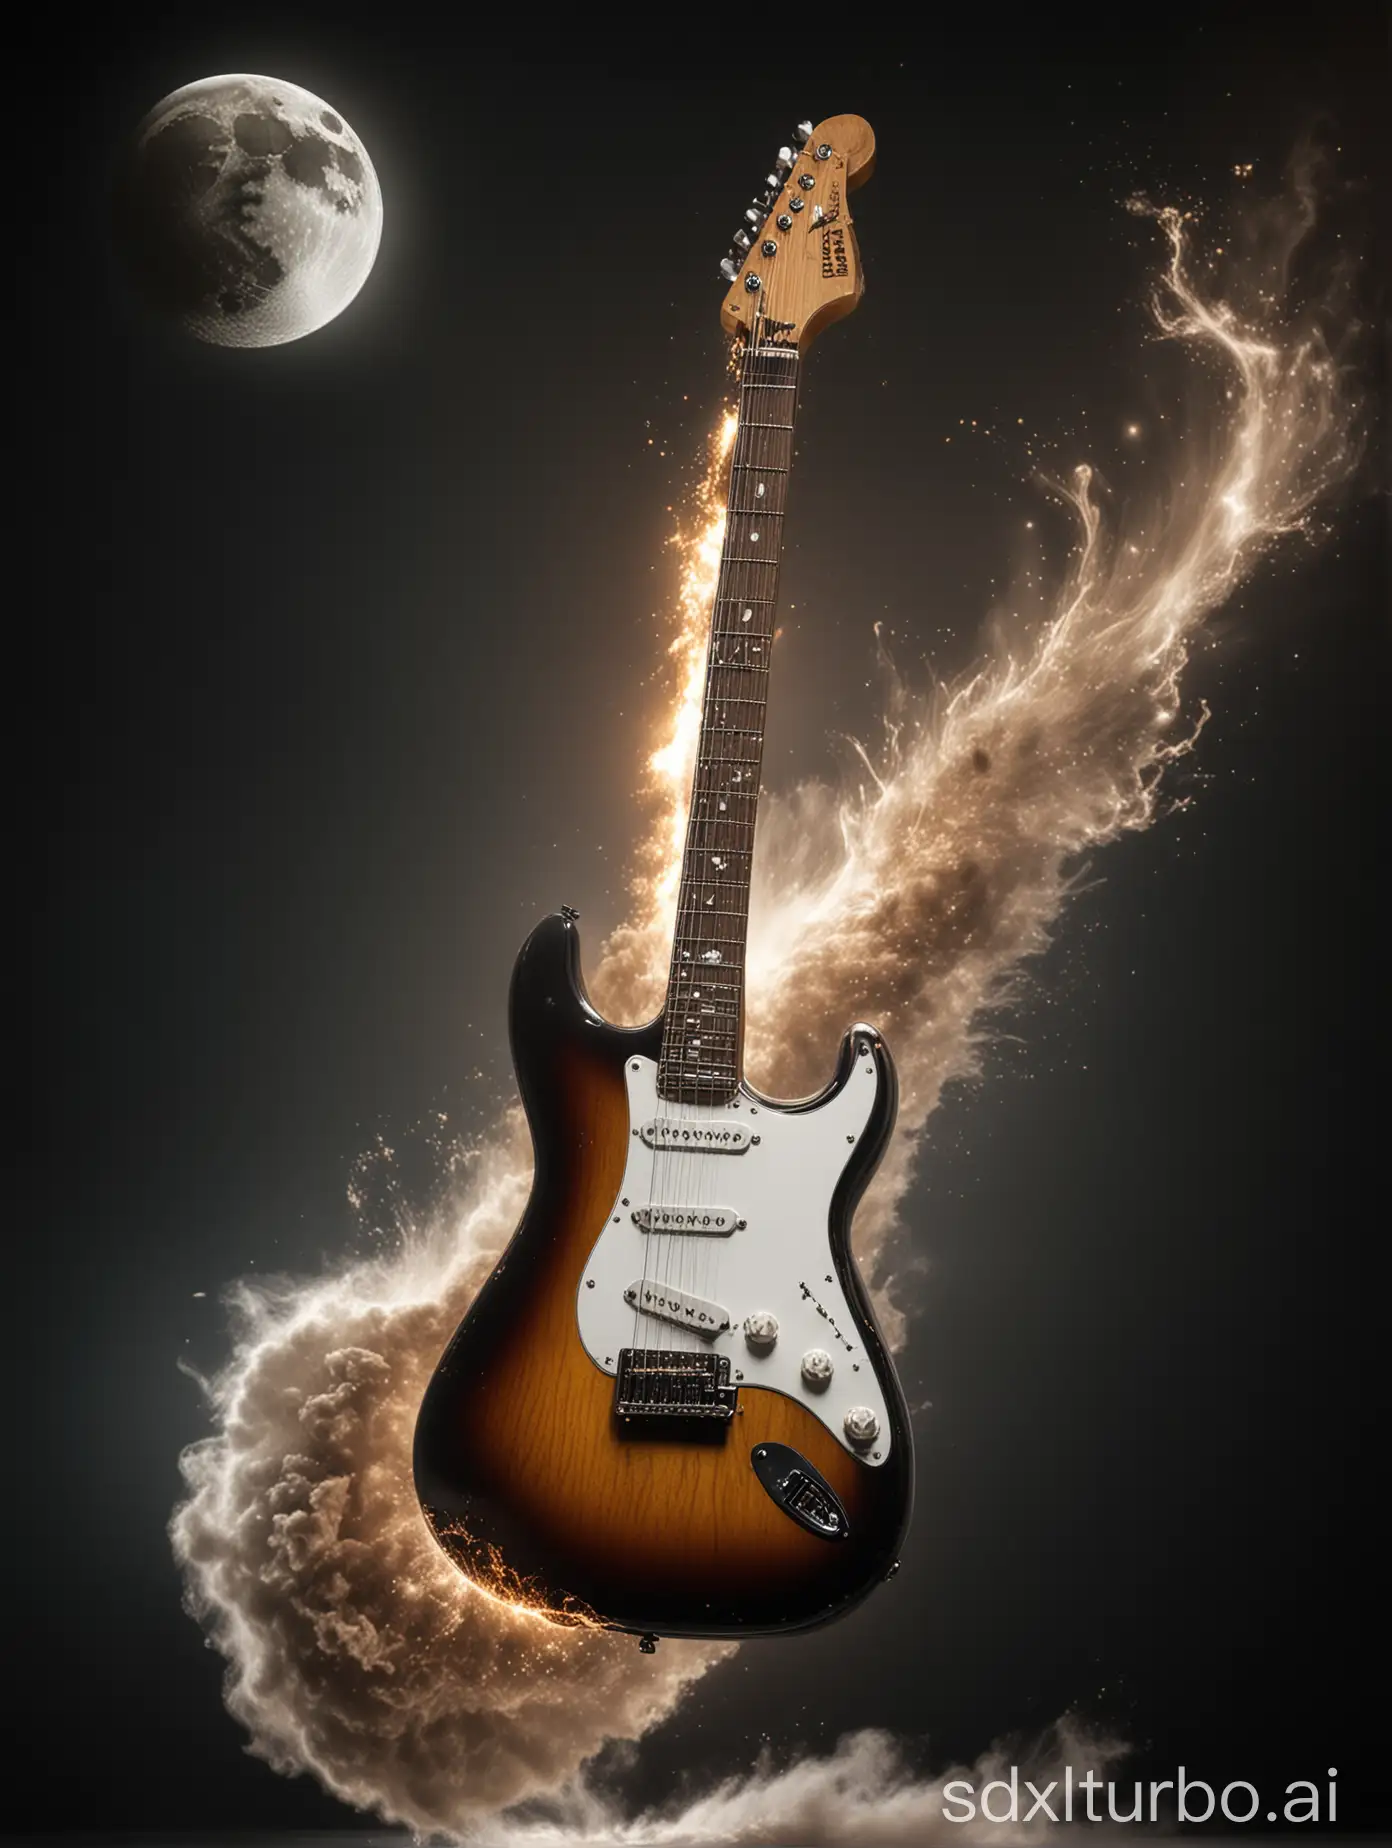 An electric guitar doing A Swift Kick to The Moon
Extremely photo reslistic high resolution imaging.